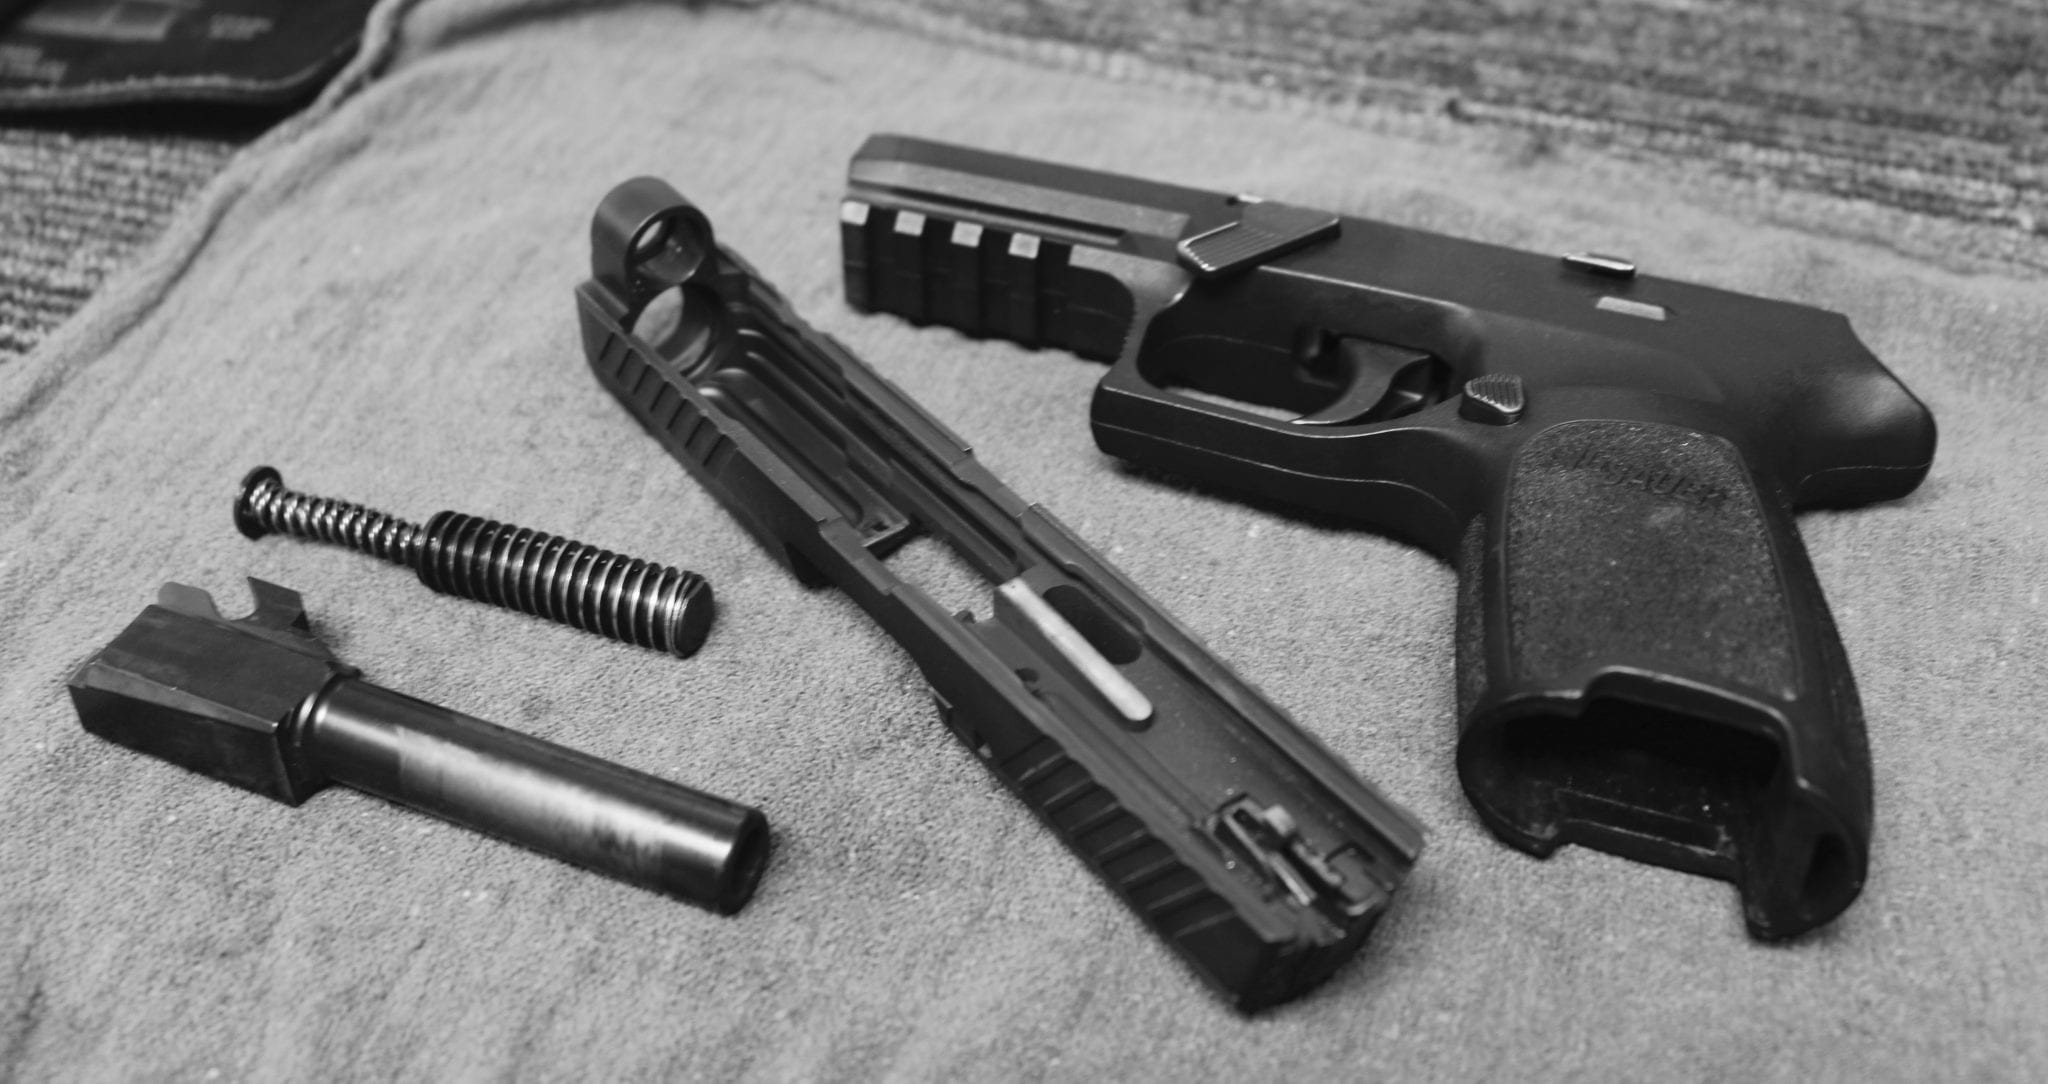 Tips for Cleaning Firearms